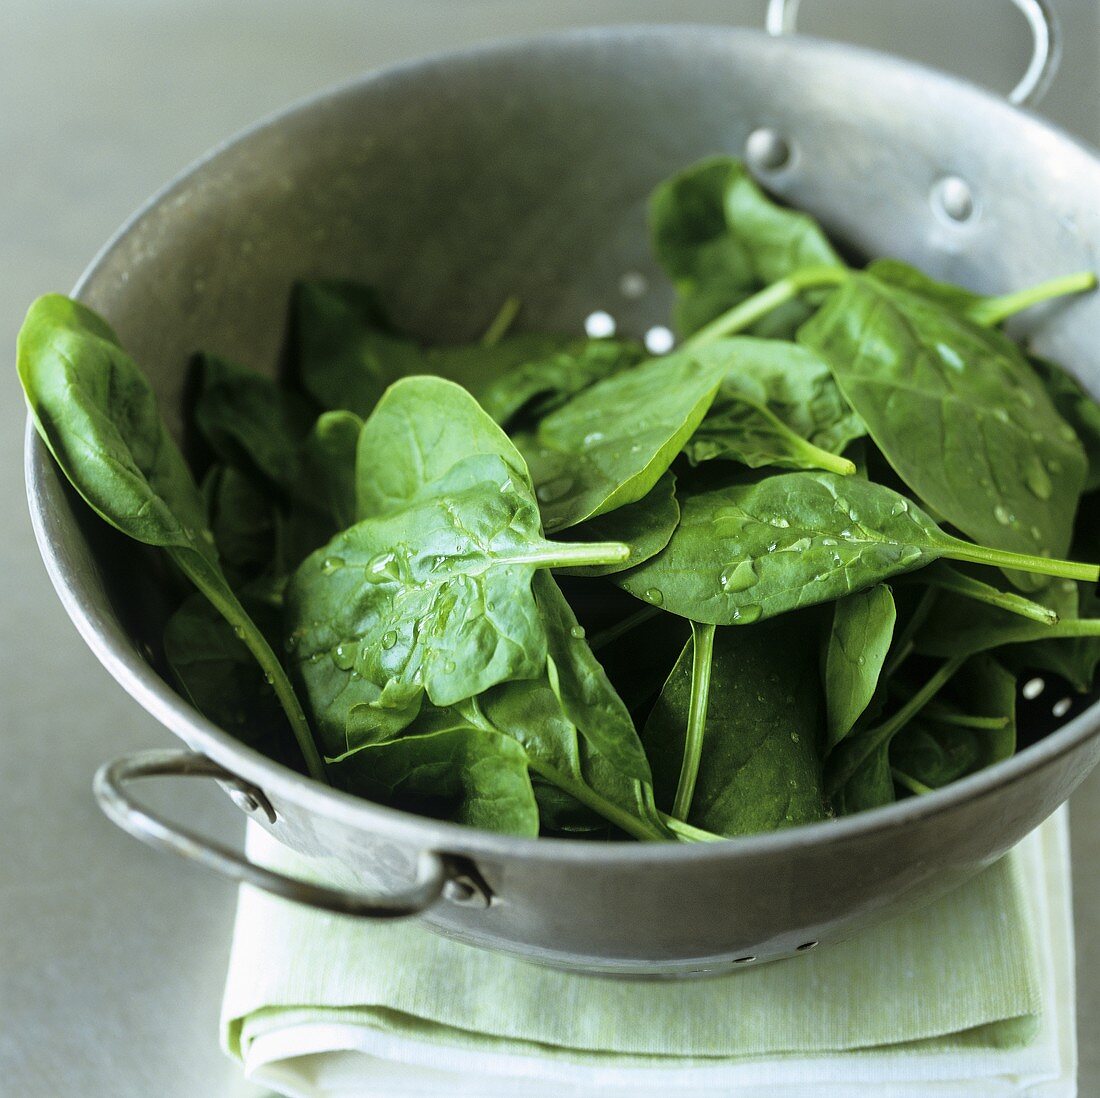 Fresh spinach leaves in a colander